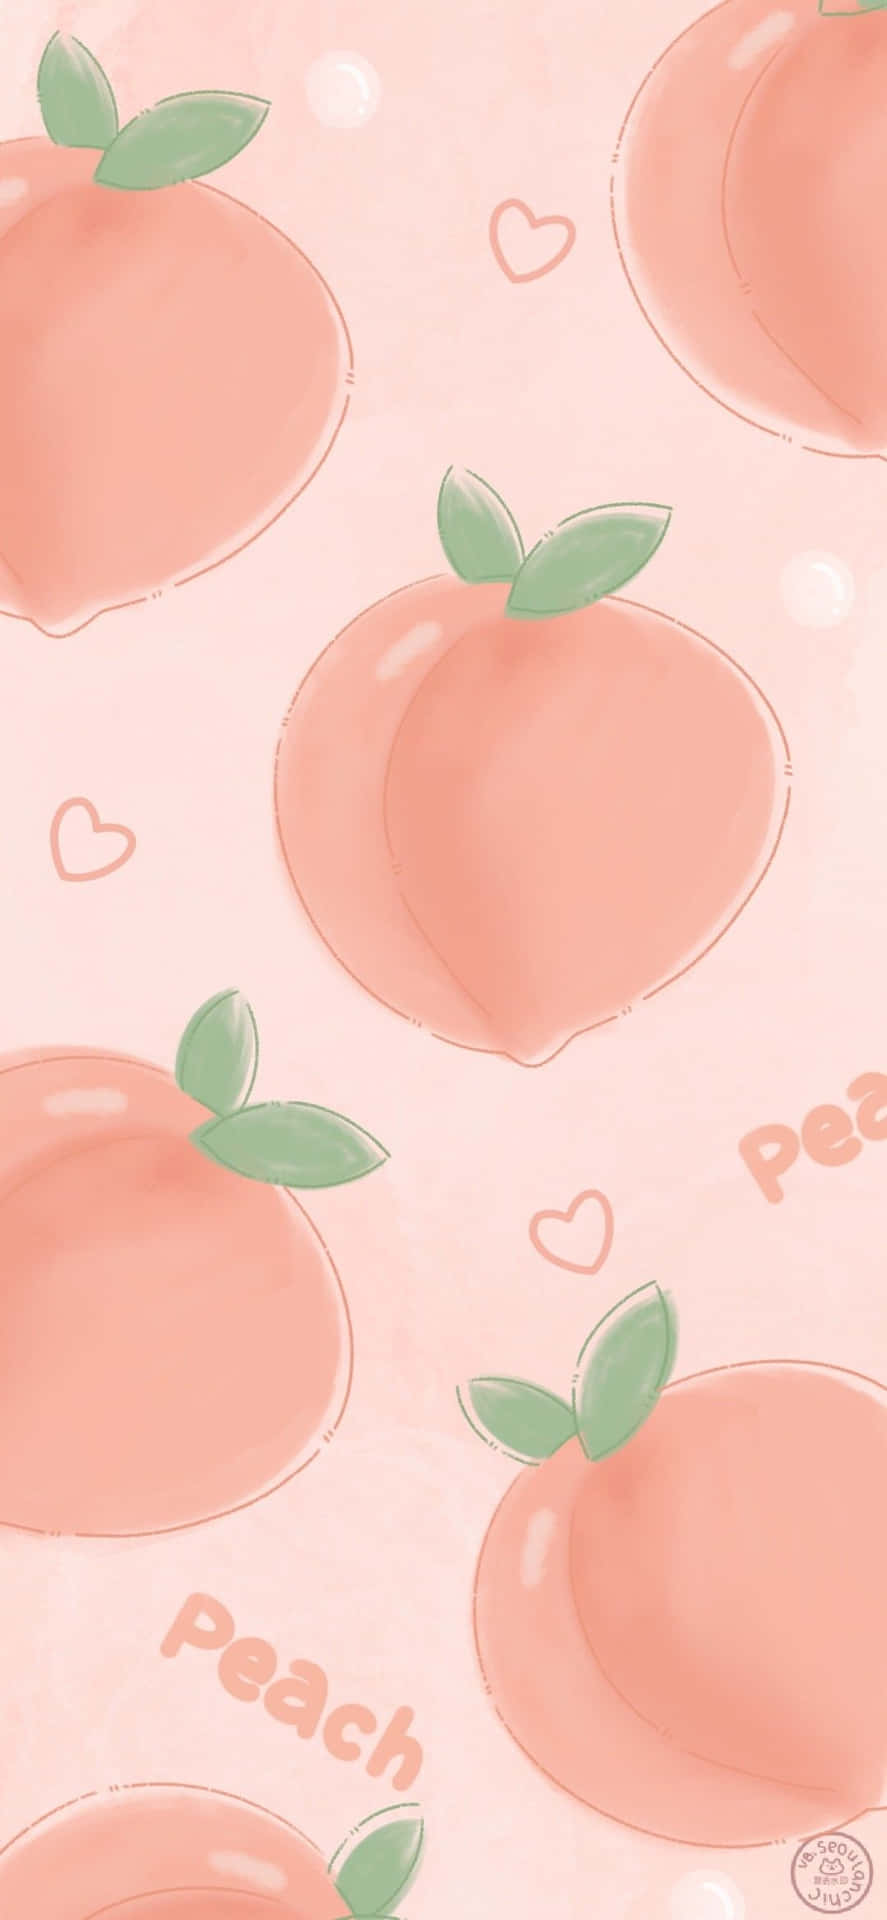 Cute Honey Peach Fruit Seamless Background Wallpaper Image For Free  Download  Pngtree